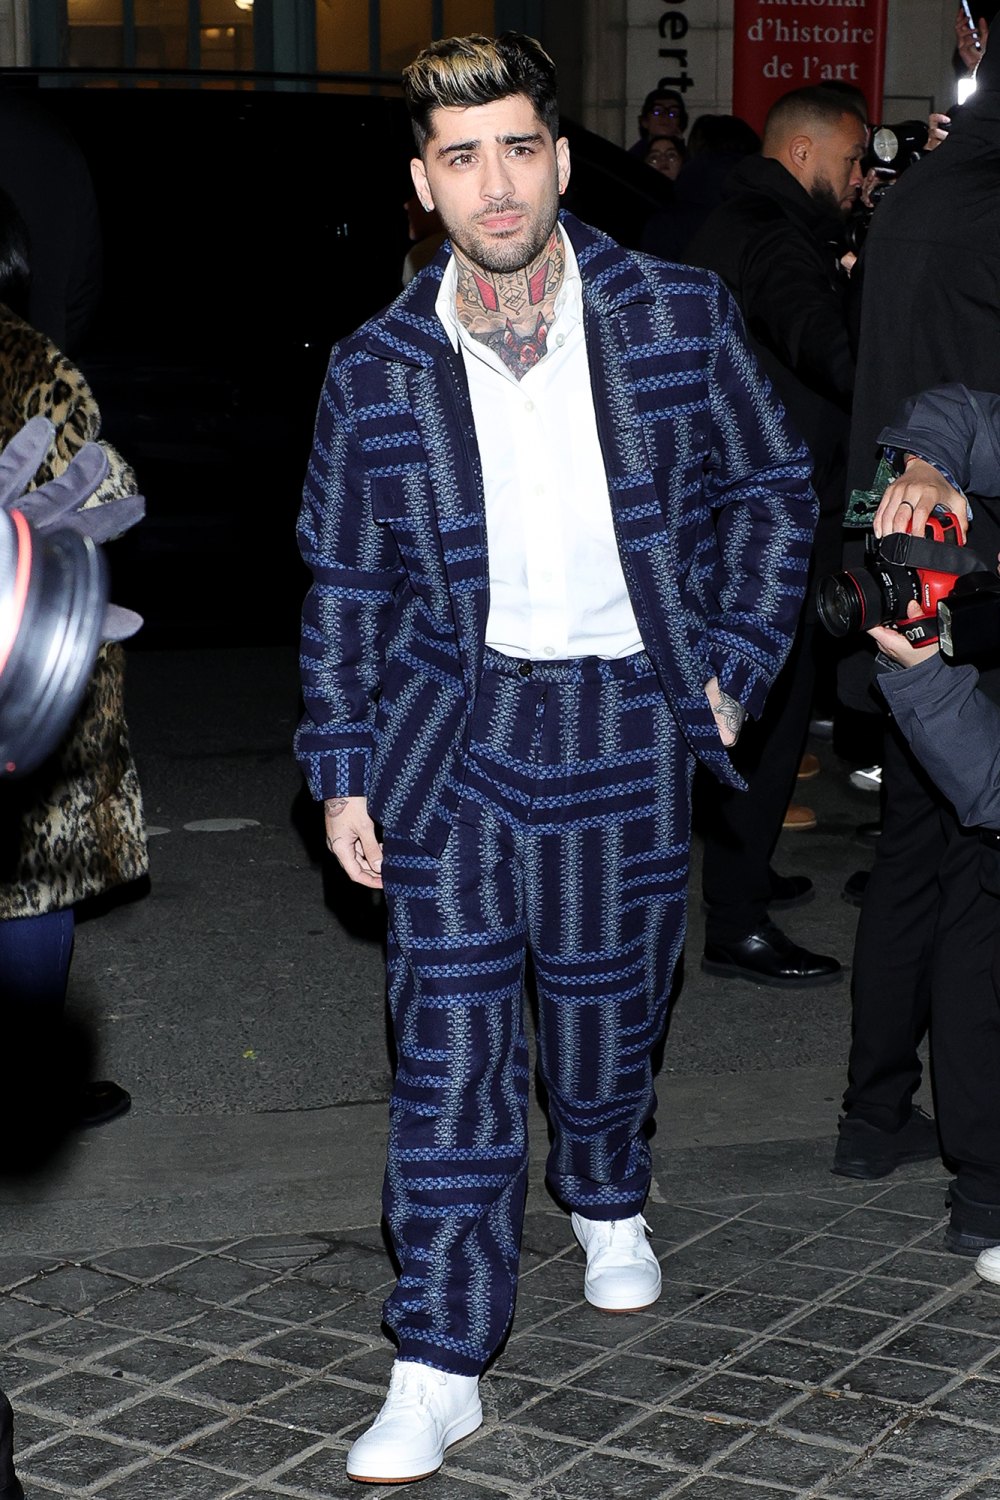 Zayn Malik Is Cool in Coordinated Suits While Attending Men’s Fashion Week in Paris